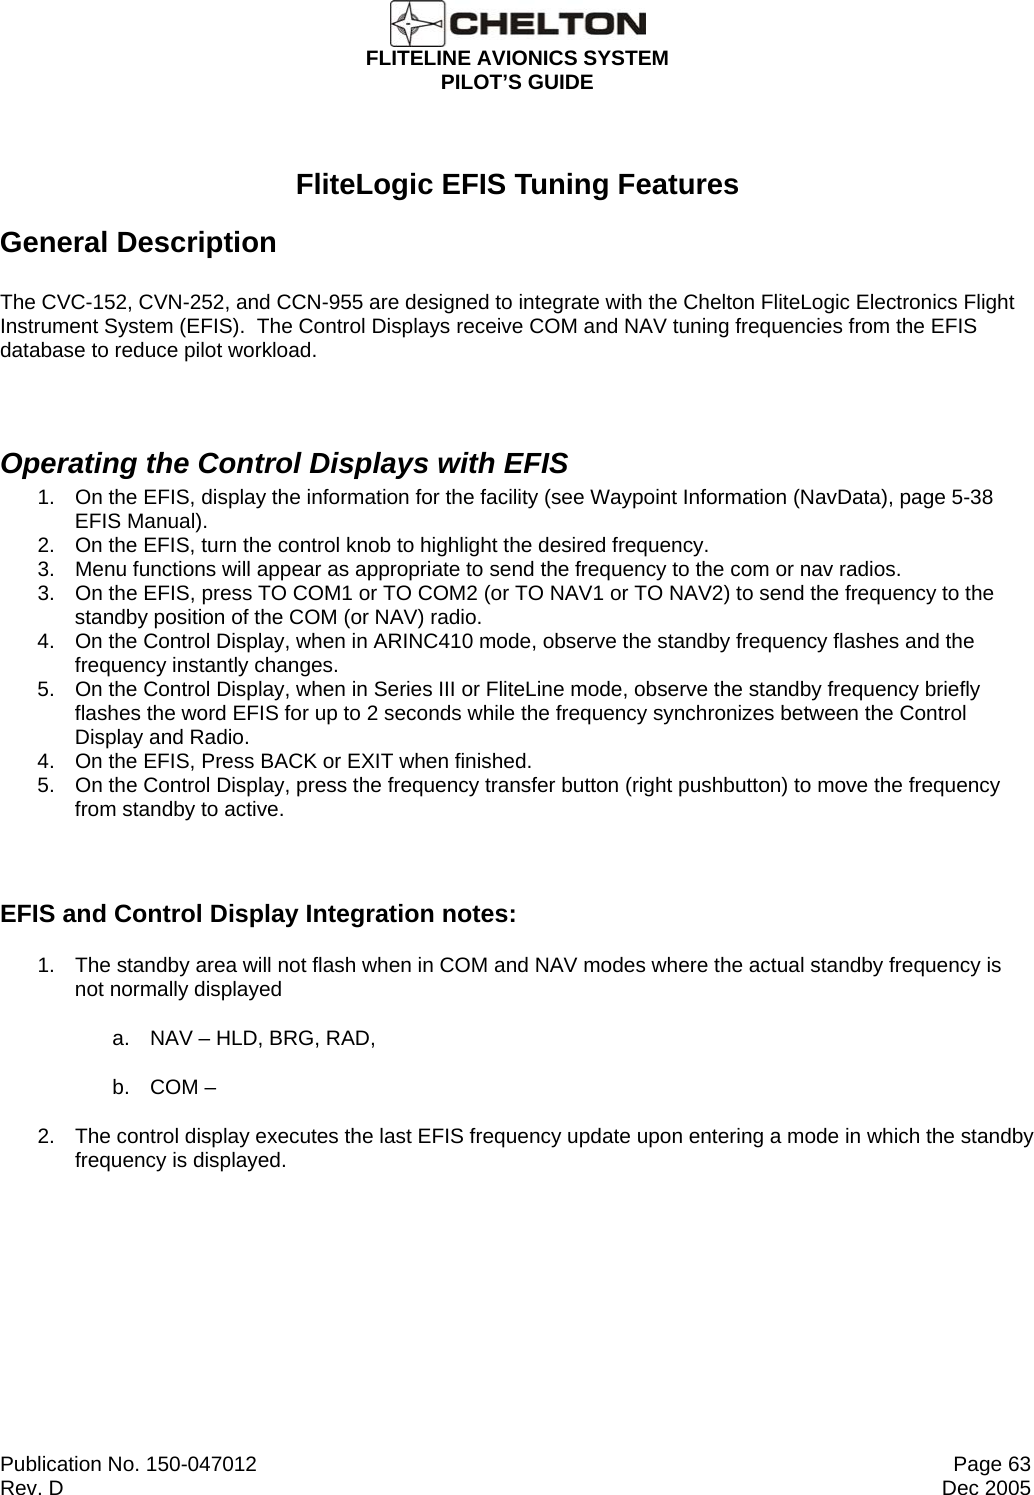  FLITELINE AVIONICS SYSTEM PILOT’S GUIDE  Publication No. 150-047012  Page 63 Rev. D  Dec 2005  FliteLogic EFIS Tuning Features General Description The CVC-152, CVN-252, and CCN-955 are designed to integrate with the Chelton FliteLogic Electronics Flight Instrument System (EFIS).  The Control Displays receive COM and NAV tuning frequencies from the EFIS database to reduce pilot workload.  Operating the Control Displays with EFIS 1.  On the EFIS, display the information for the facility (see Waypoint Information (NavData), page 5-38 EFIS Manual). 2.  On the EFIS, turn the control knob to highlight the desired frequency. 3.  Menu functions will appear as appropriate to send the frequency to the com or nav radios. 3.  On the EFIS, press TO COM1 or TO COM2 (or TO NAV1 or TO NAV2) to send the frequency to the standby position of the COM (or NAV) radio. 4.  On the Control Display, when in ARINC410 mode, observe the standby frequency flashes and the frequency instantly changes. 5.  On the Control Display, when in Series III or FliteLine mode, observe the standby frequency briefly flashes the word EFIS for up to 2 seconds while the frequency synchronizes between the Control Display and Radio. 4.  On the EFIS, Press BACK or EXIT when finished. 5.  On the Control Display, press the frequency transfer button (right pushbutton) to move the frequency from standby to active.  EFIS and Control Display Integration notes: 1.  The standby area will not flash when in COM and NAV modes where the actual standby frequency is not normally displayed a.  NAV – HLD, BRG, RAD, b.  COM –  2.  The control display executes the last EFIS frequency update upon entering a mode in which the standby frequency is displayed.  